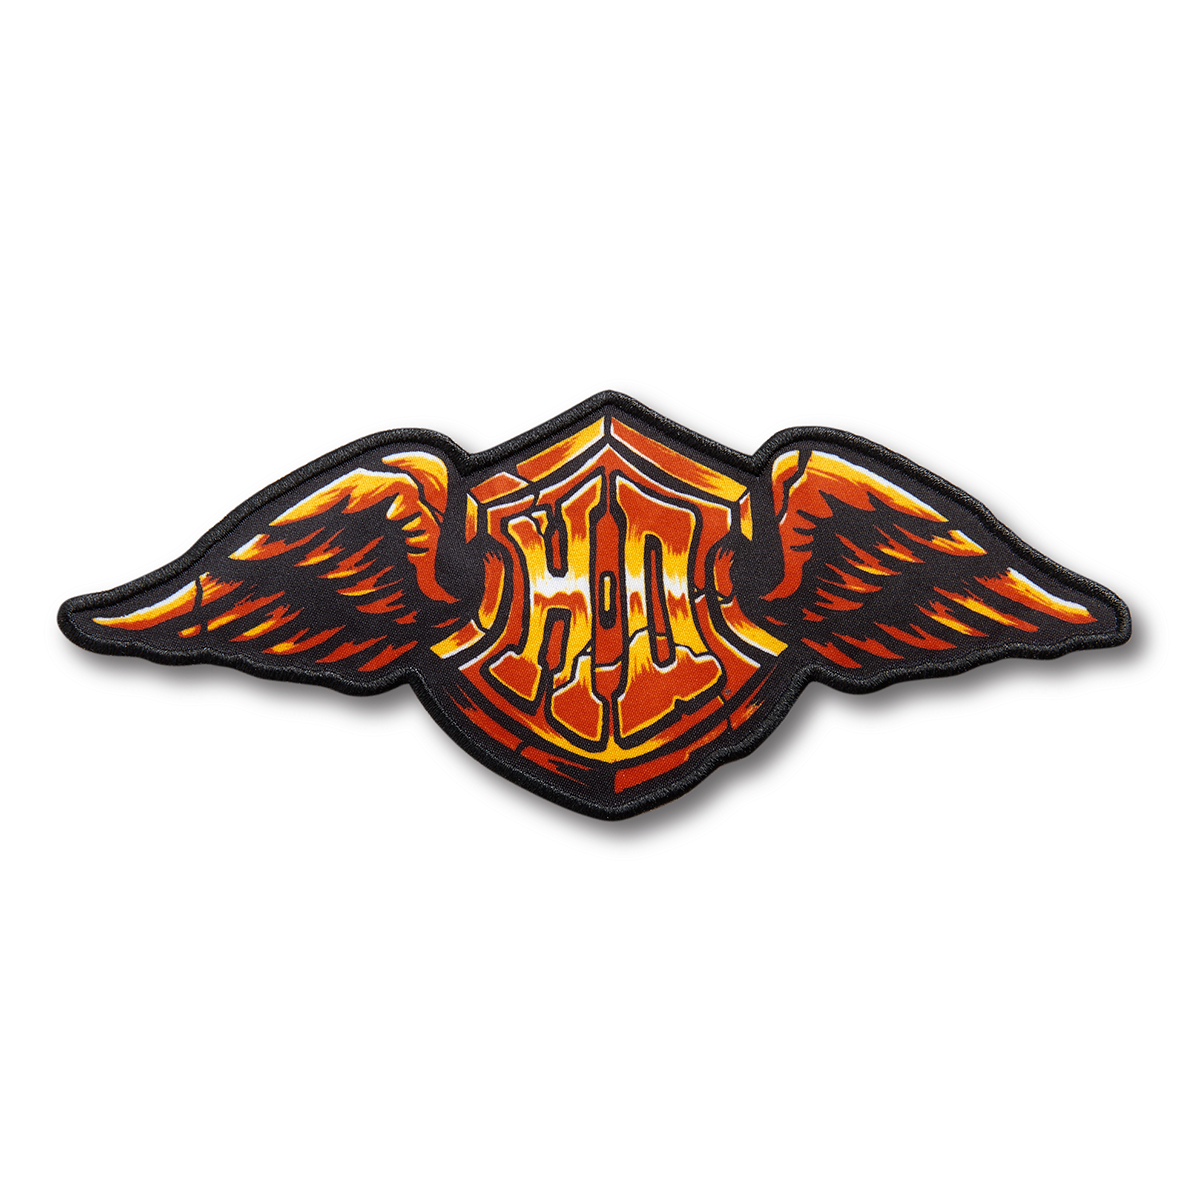 Harley-Davidson Stone Wings Iron-On Patch